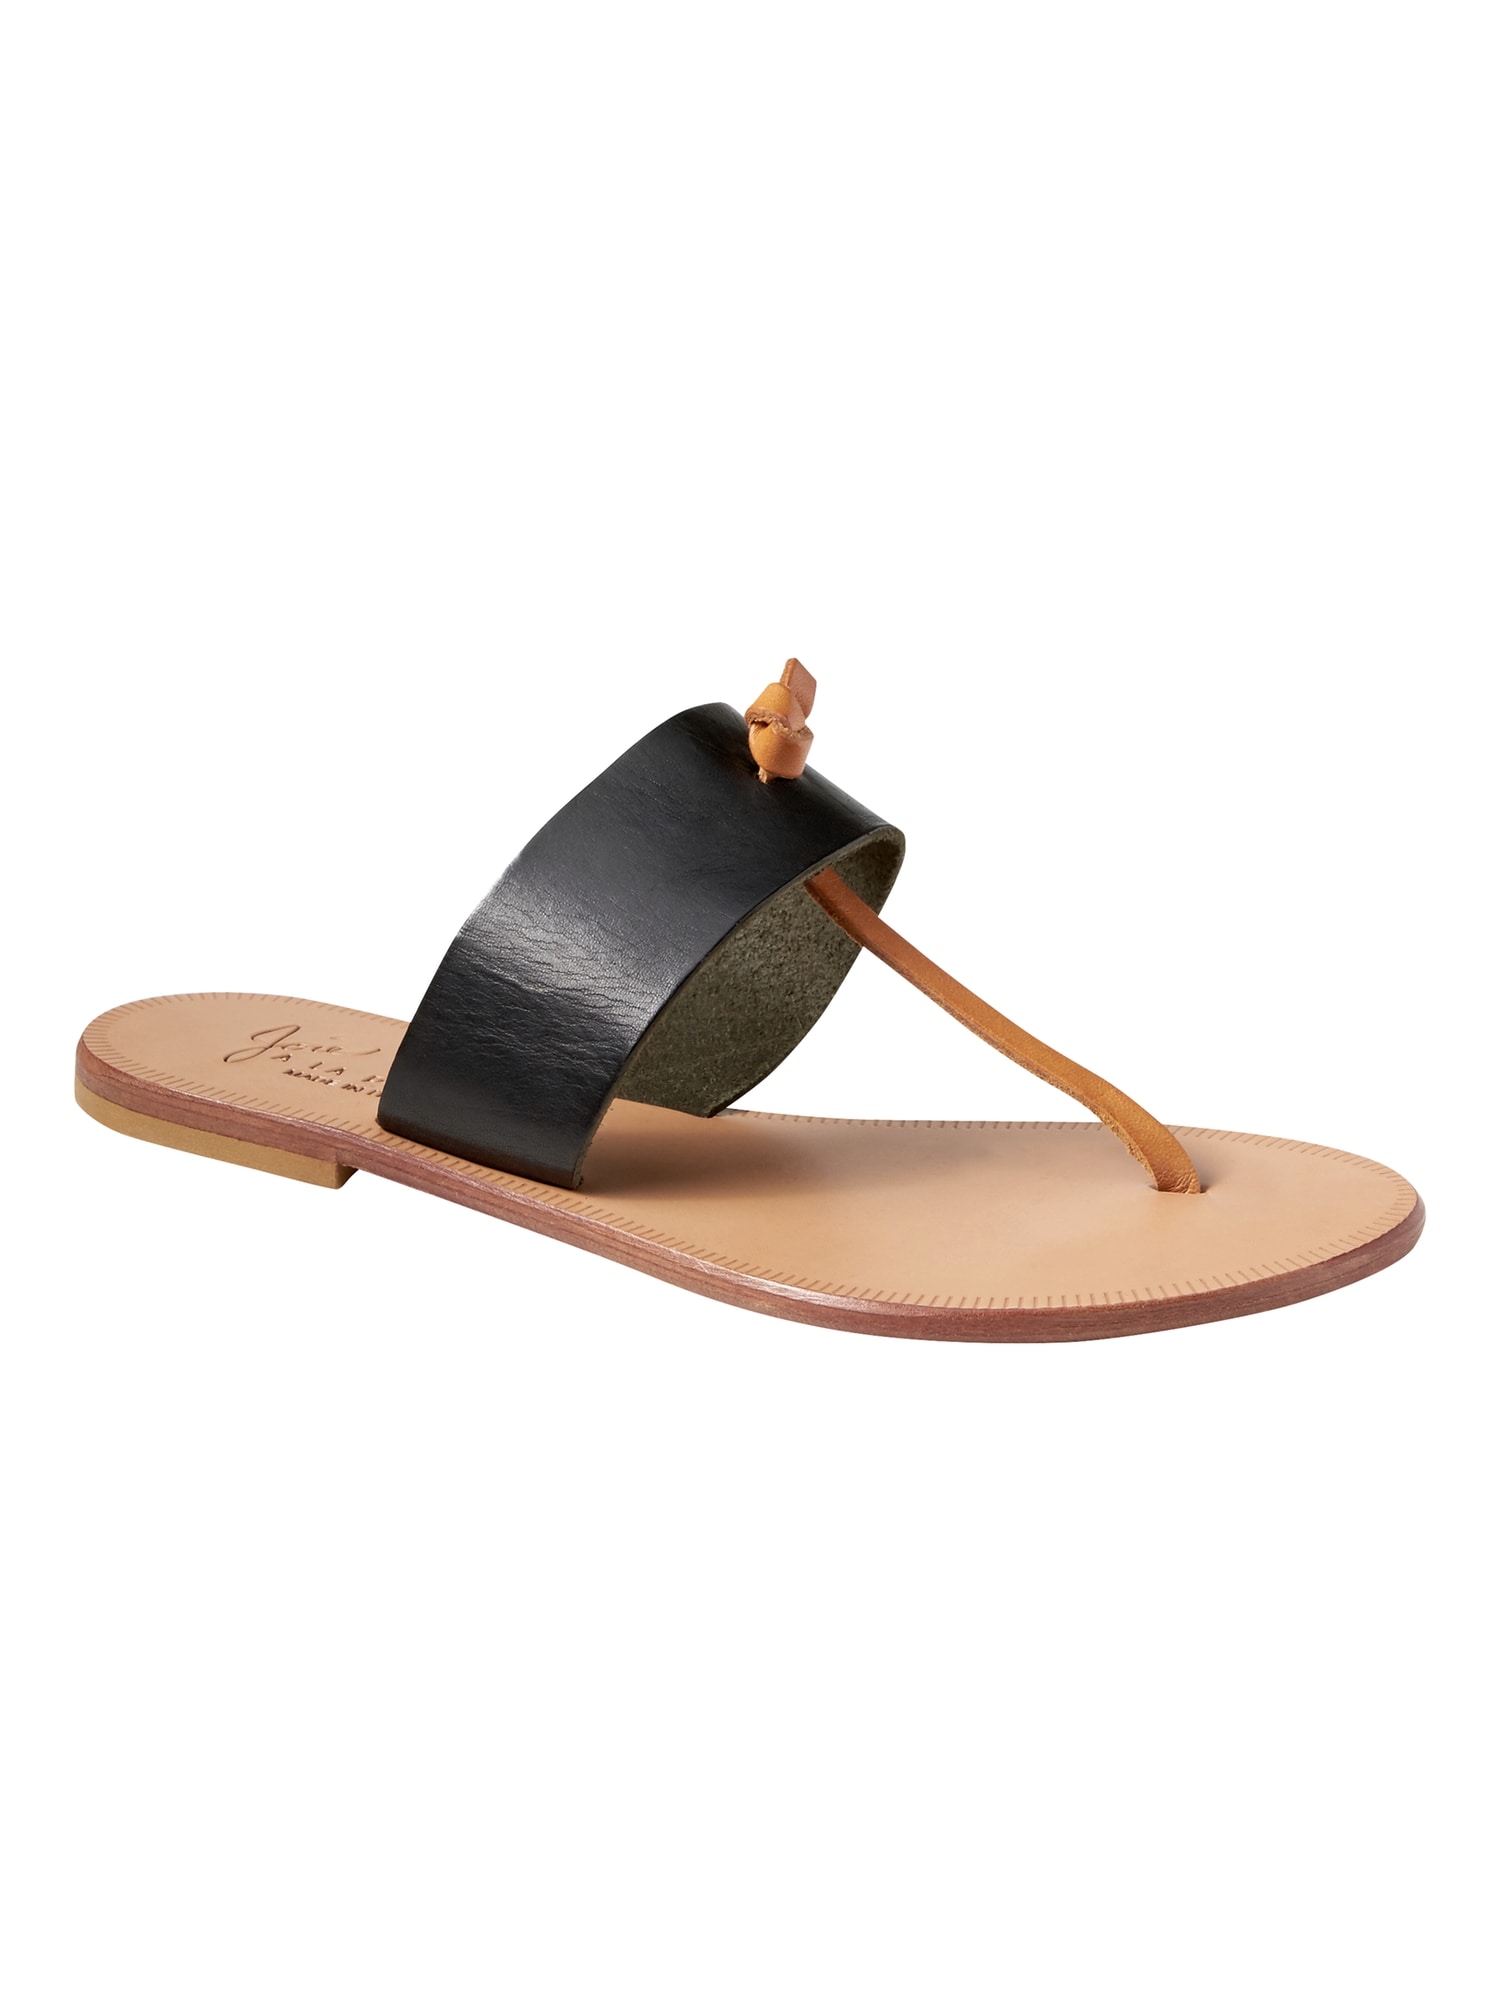 72 Trending Women's Spring Sandals (as low as $19!) — The Overwhelmed ...